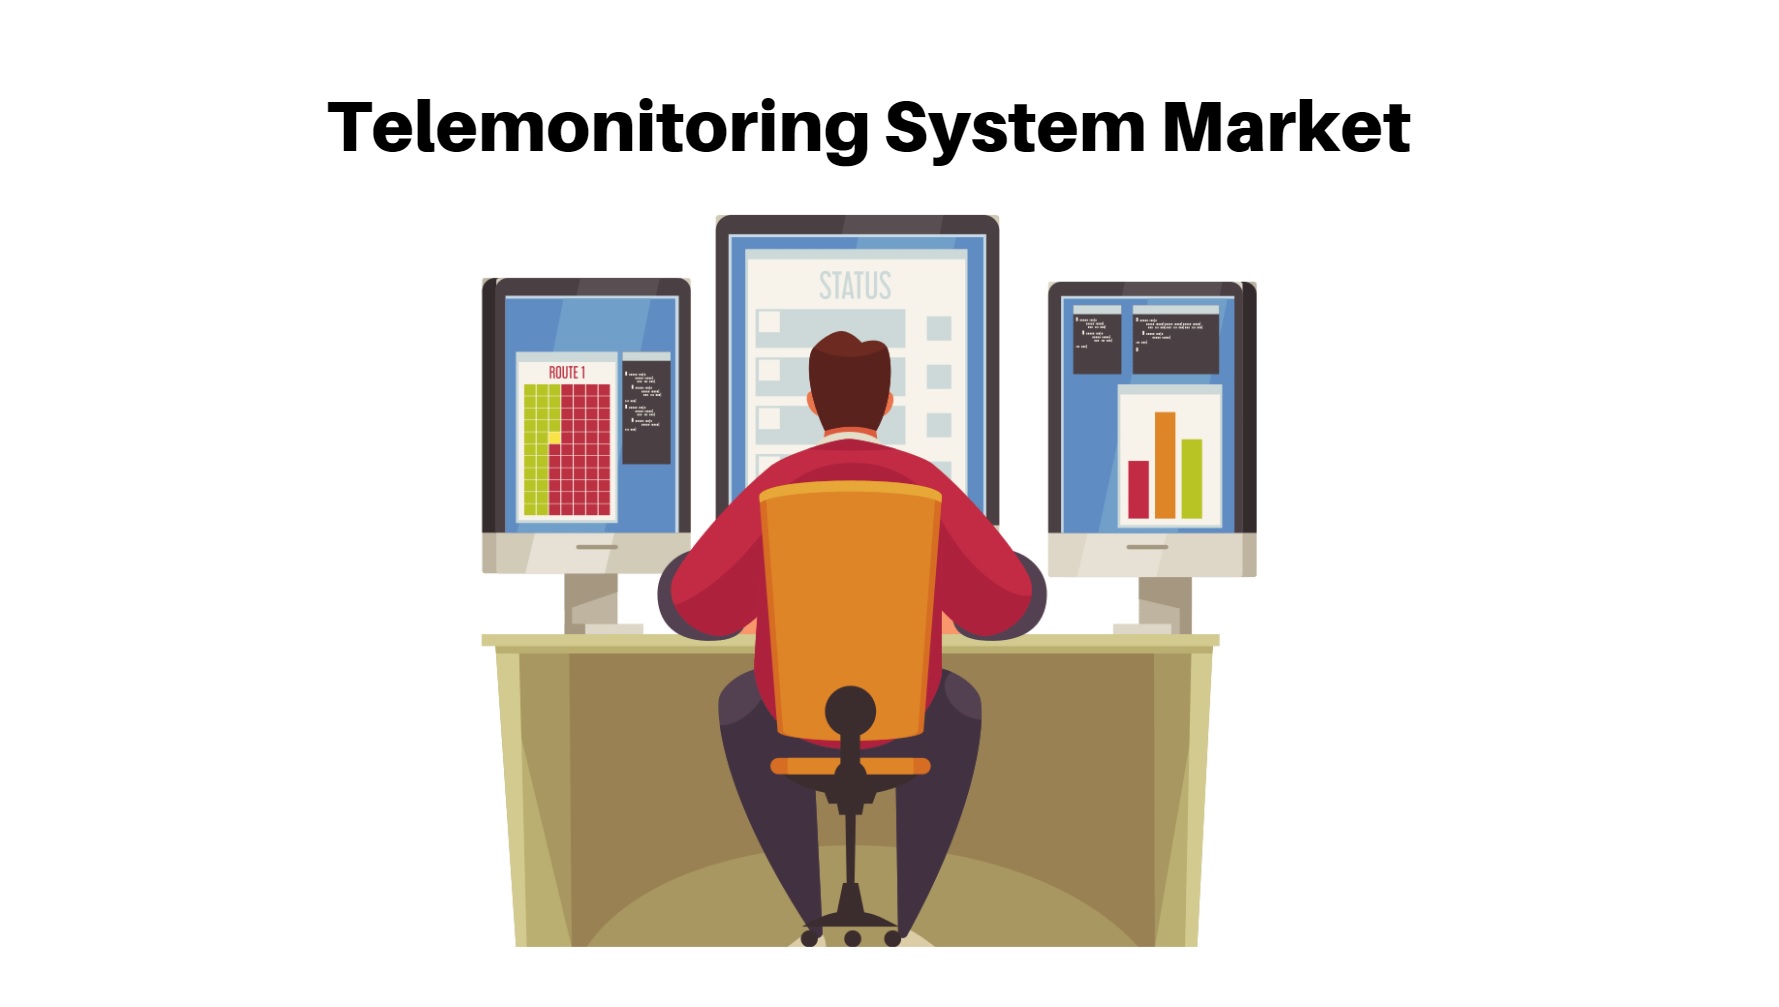 Telemonitoring System Market is expected to reach USD 27.32 Bn by 2033 | CAGR of 19.5%